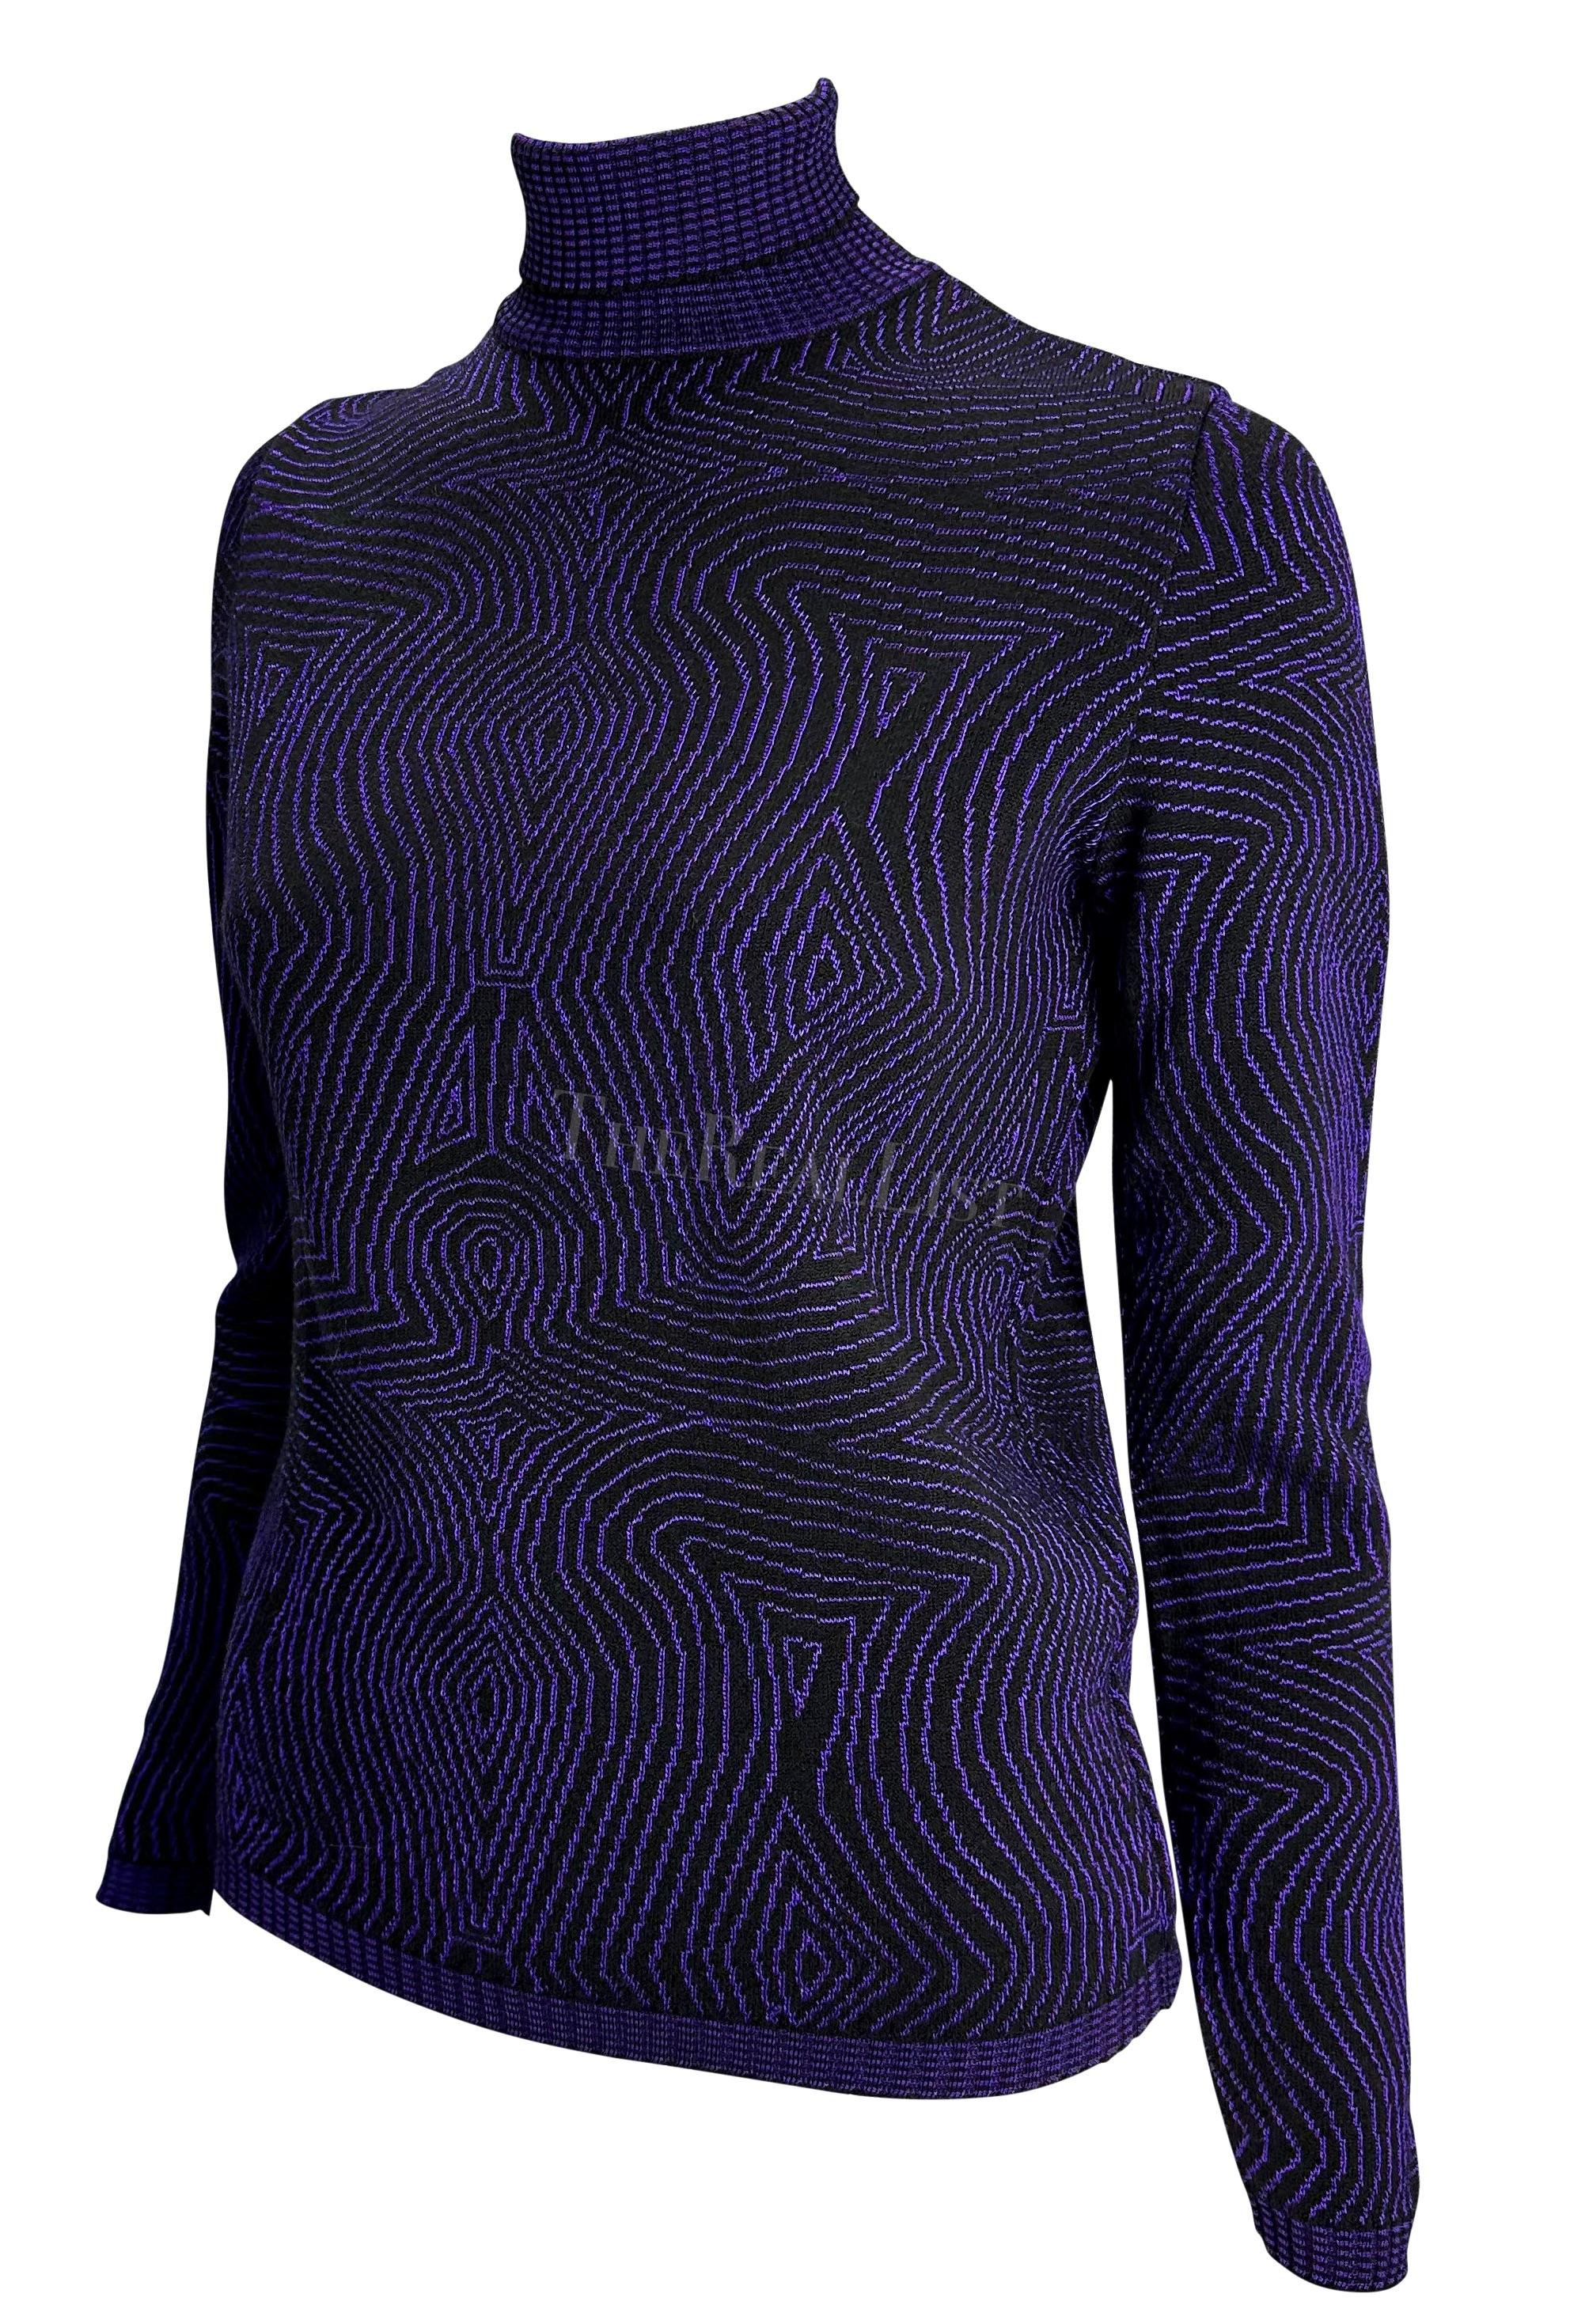 Presenting a chic purple and black Gianni Versace turtleneck sweater, designed by Gianni Versace. From 1996, this fabulous knit sweater features an abstract linear pattern and is the perfect vintage Gianni Versace closet staple. Similar patterns